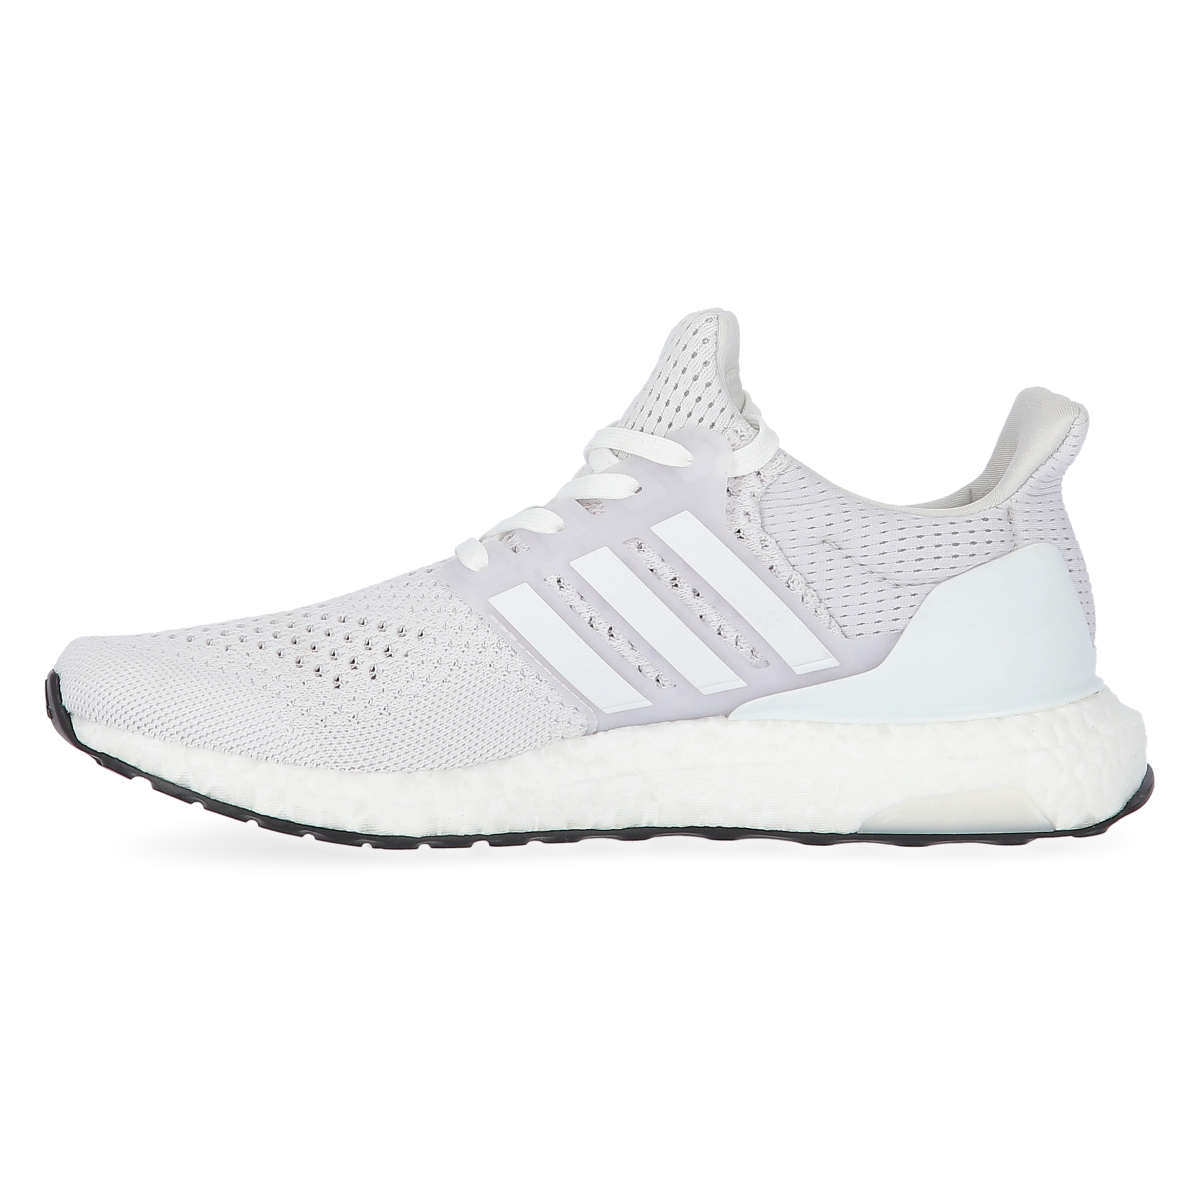 Zapatillas adidas Ultraboost 1.0 Hombre,  image number null